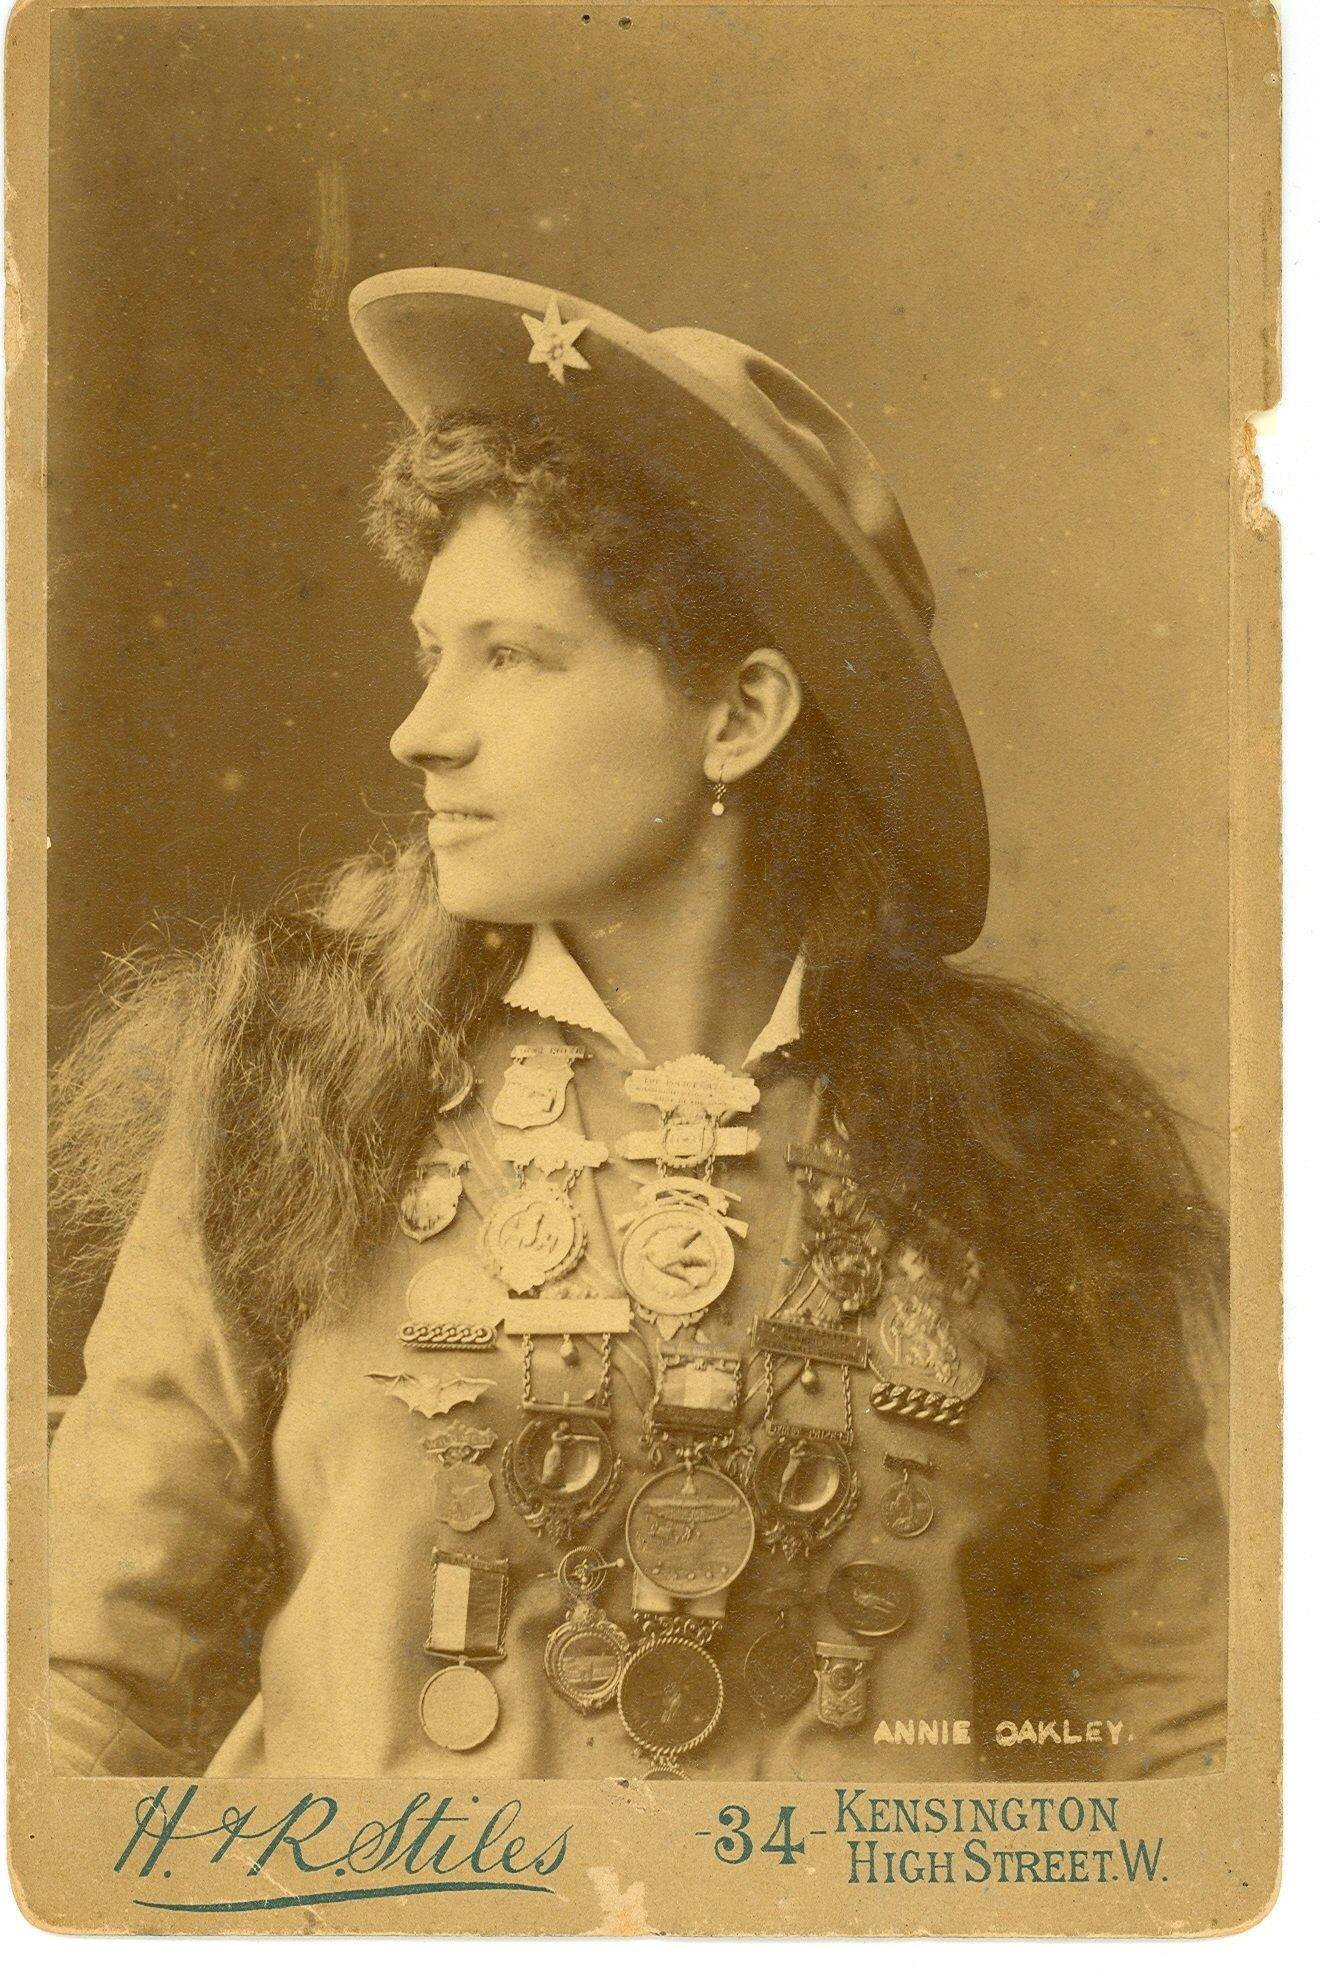 (Garst Museum and the National Annie Oakley Center photo)